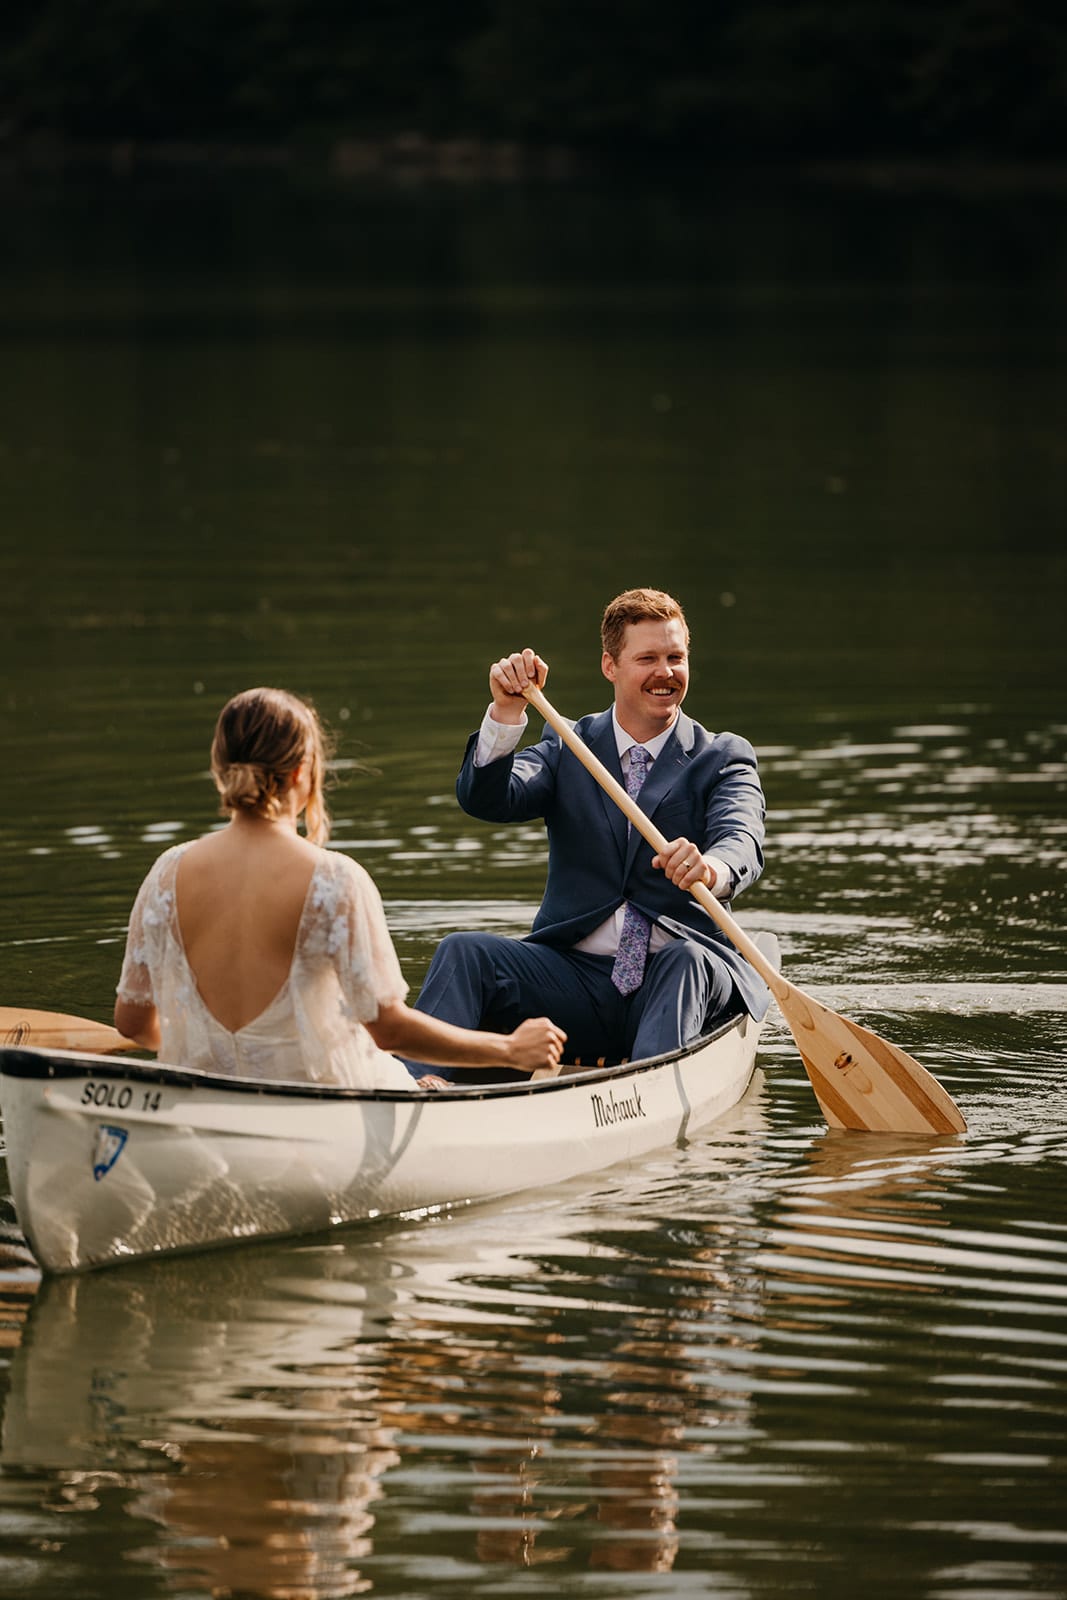 The groom paddles a canoe on the lake at camp.